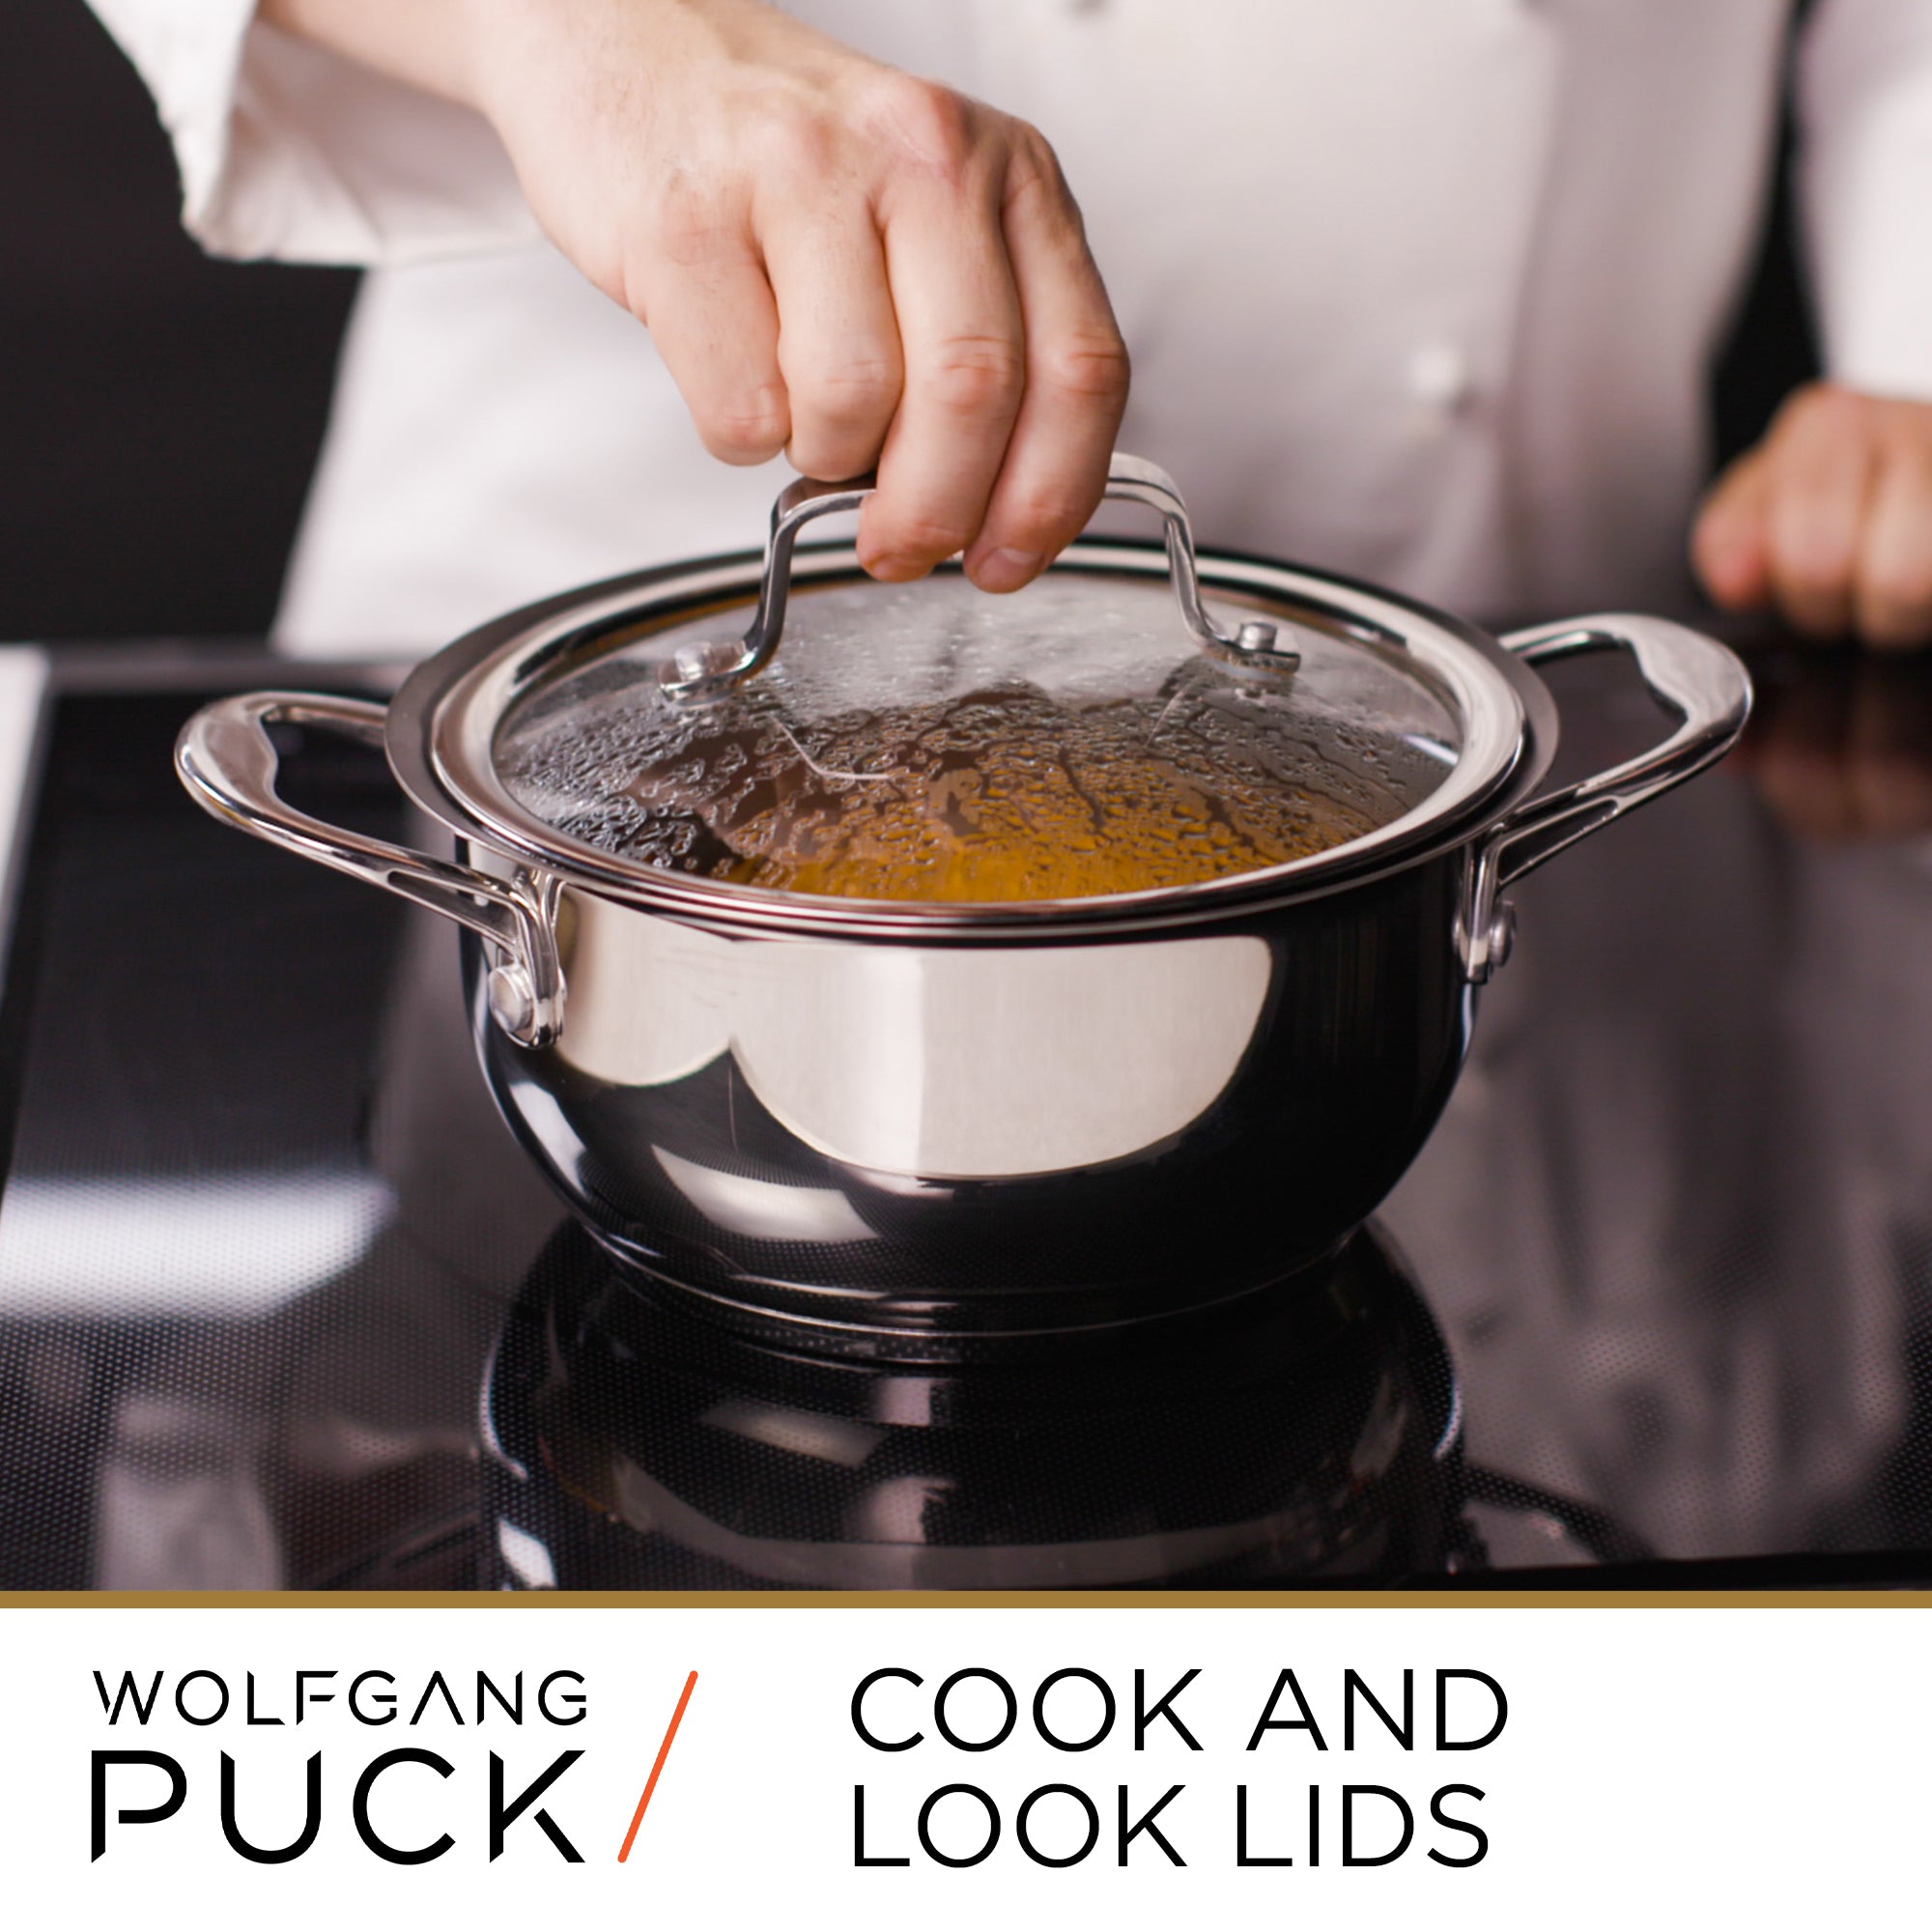 Wolfgang Puck 3-Piece Stainless Steel Skillet Set, Scratch-Resistant  Non-Stick Coating, Includes a Large and Small Skillet, Clear Tempered-Glass  Lid, Cool Touch Handles, Extra-Wide Rims 